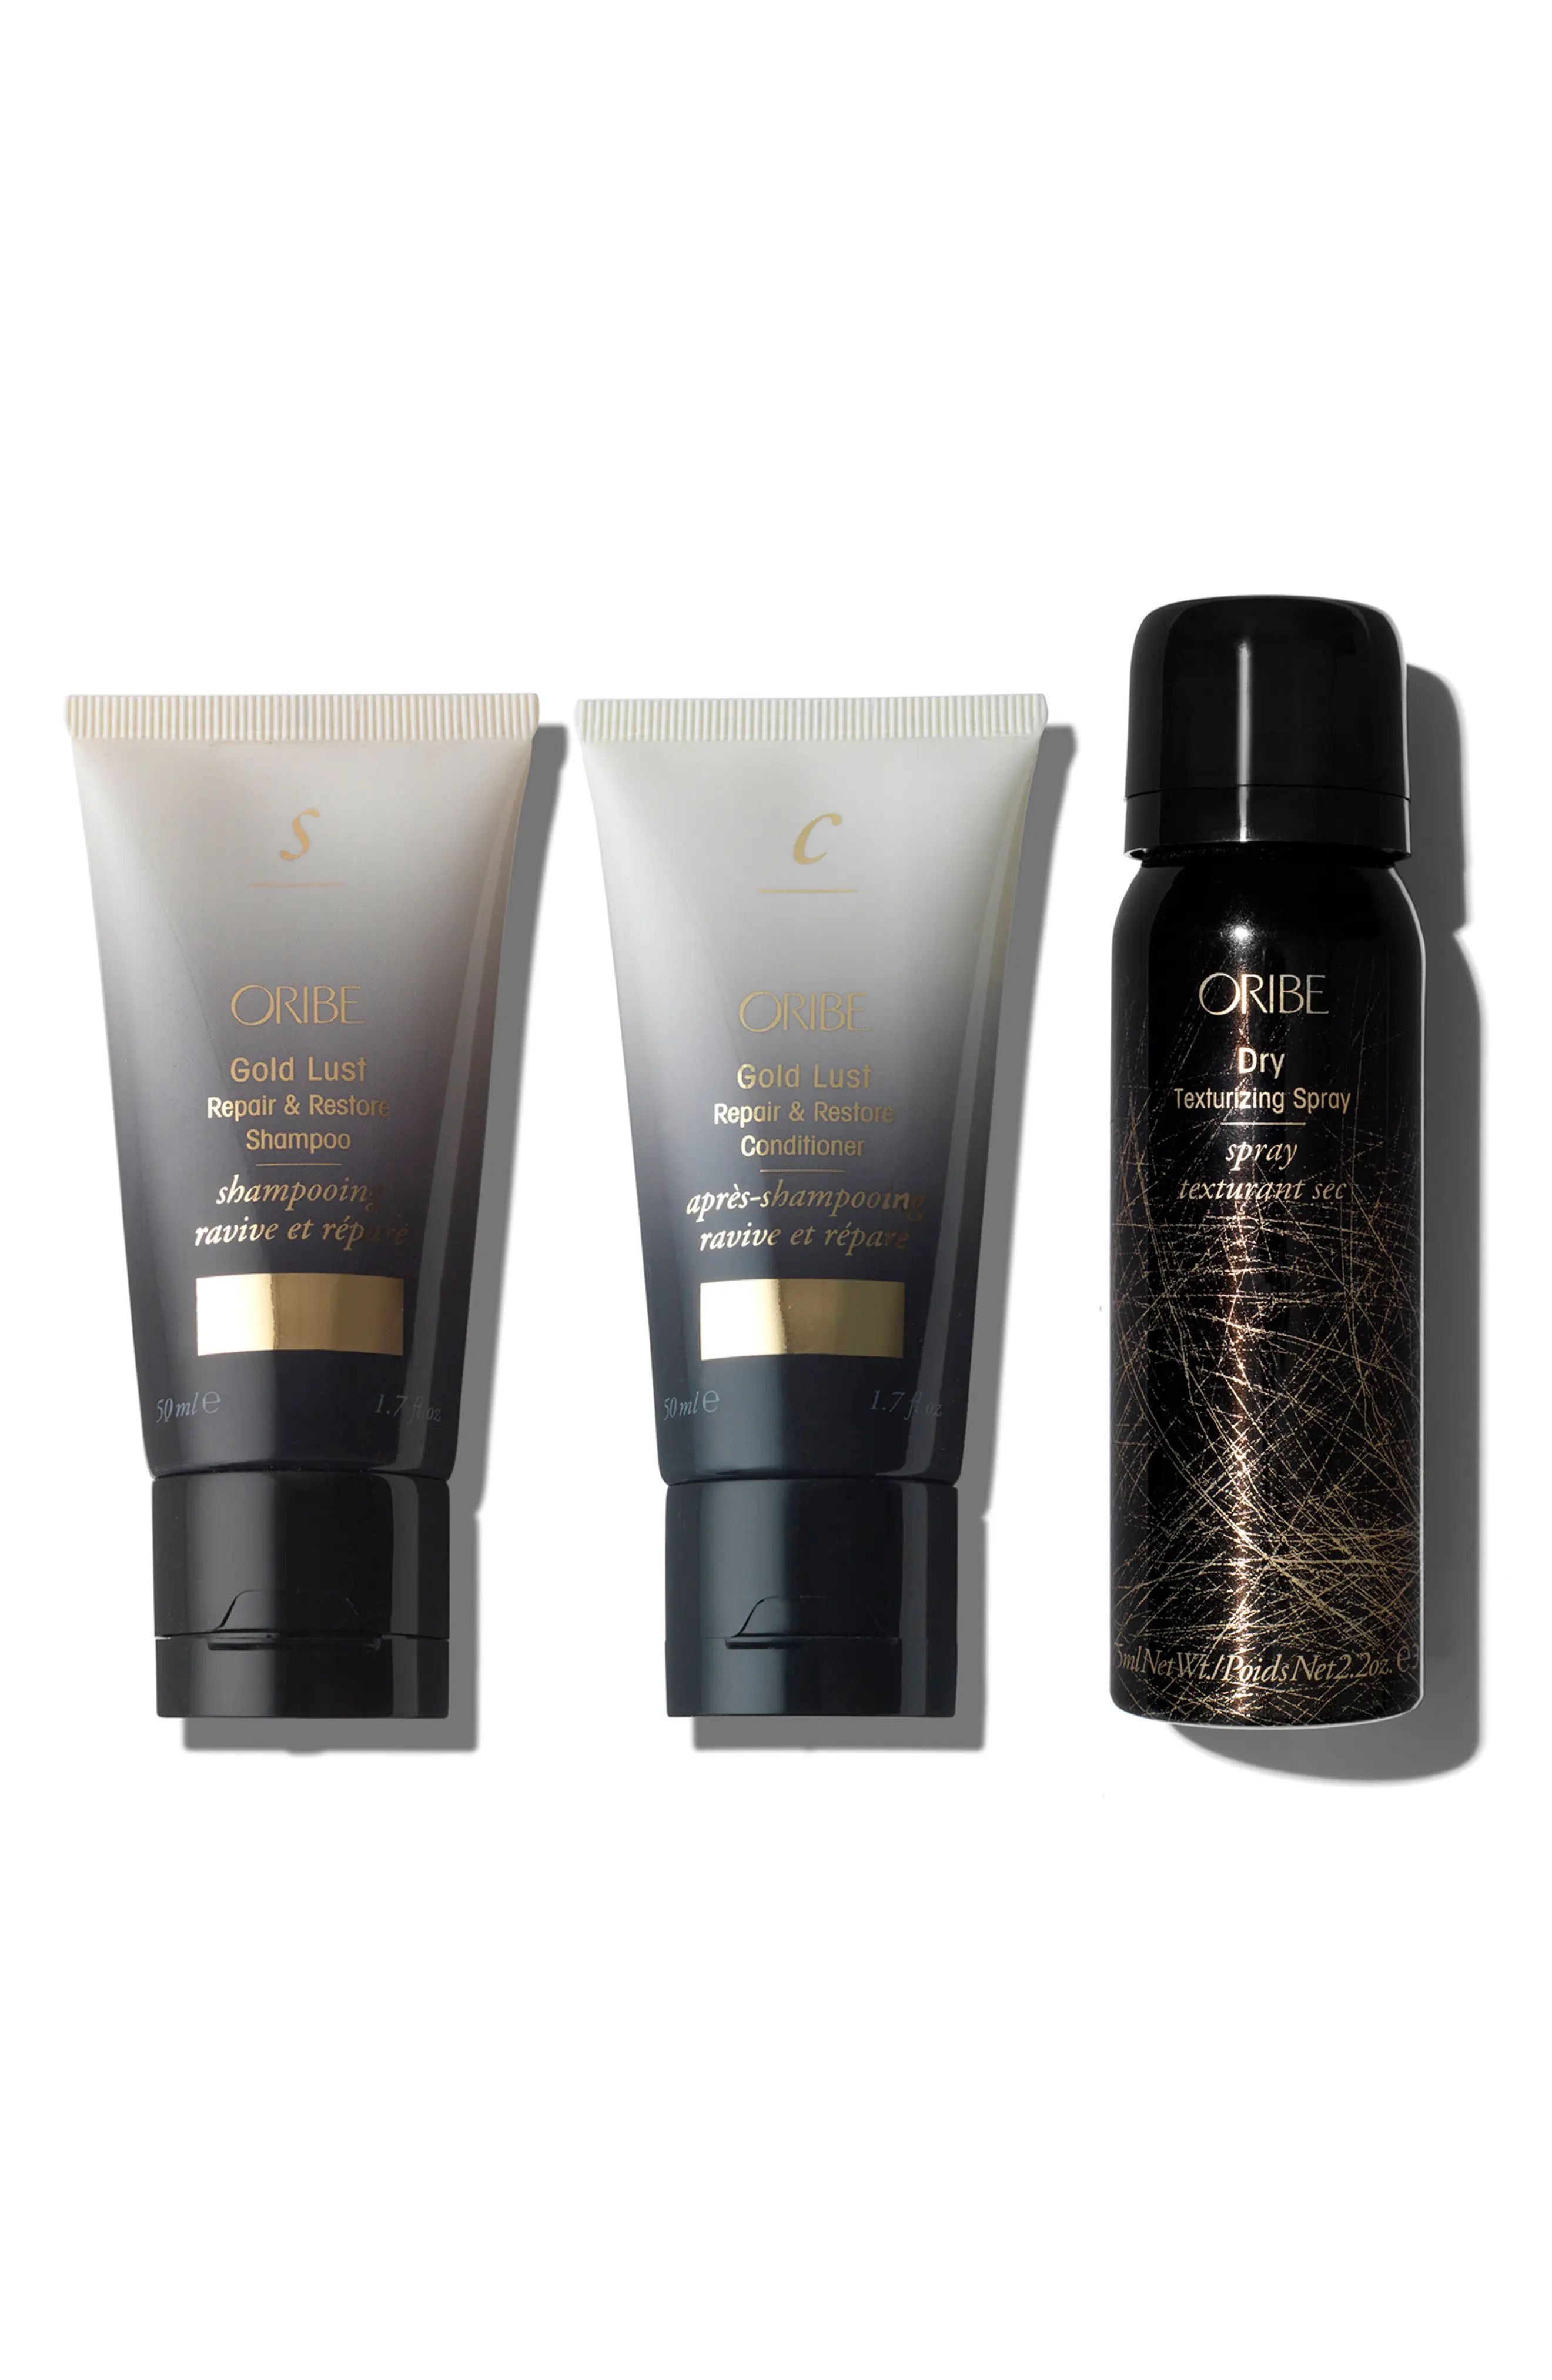 SPACE.NK.apothecary Oribe Gold Lust Set ($57 Value) | Nordstrom